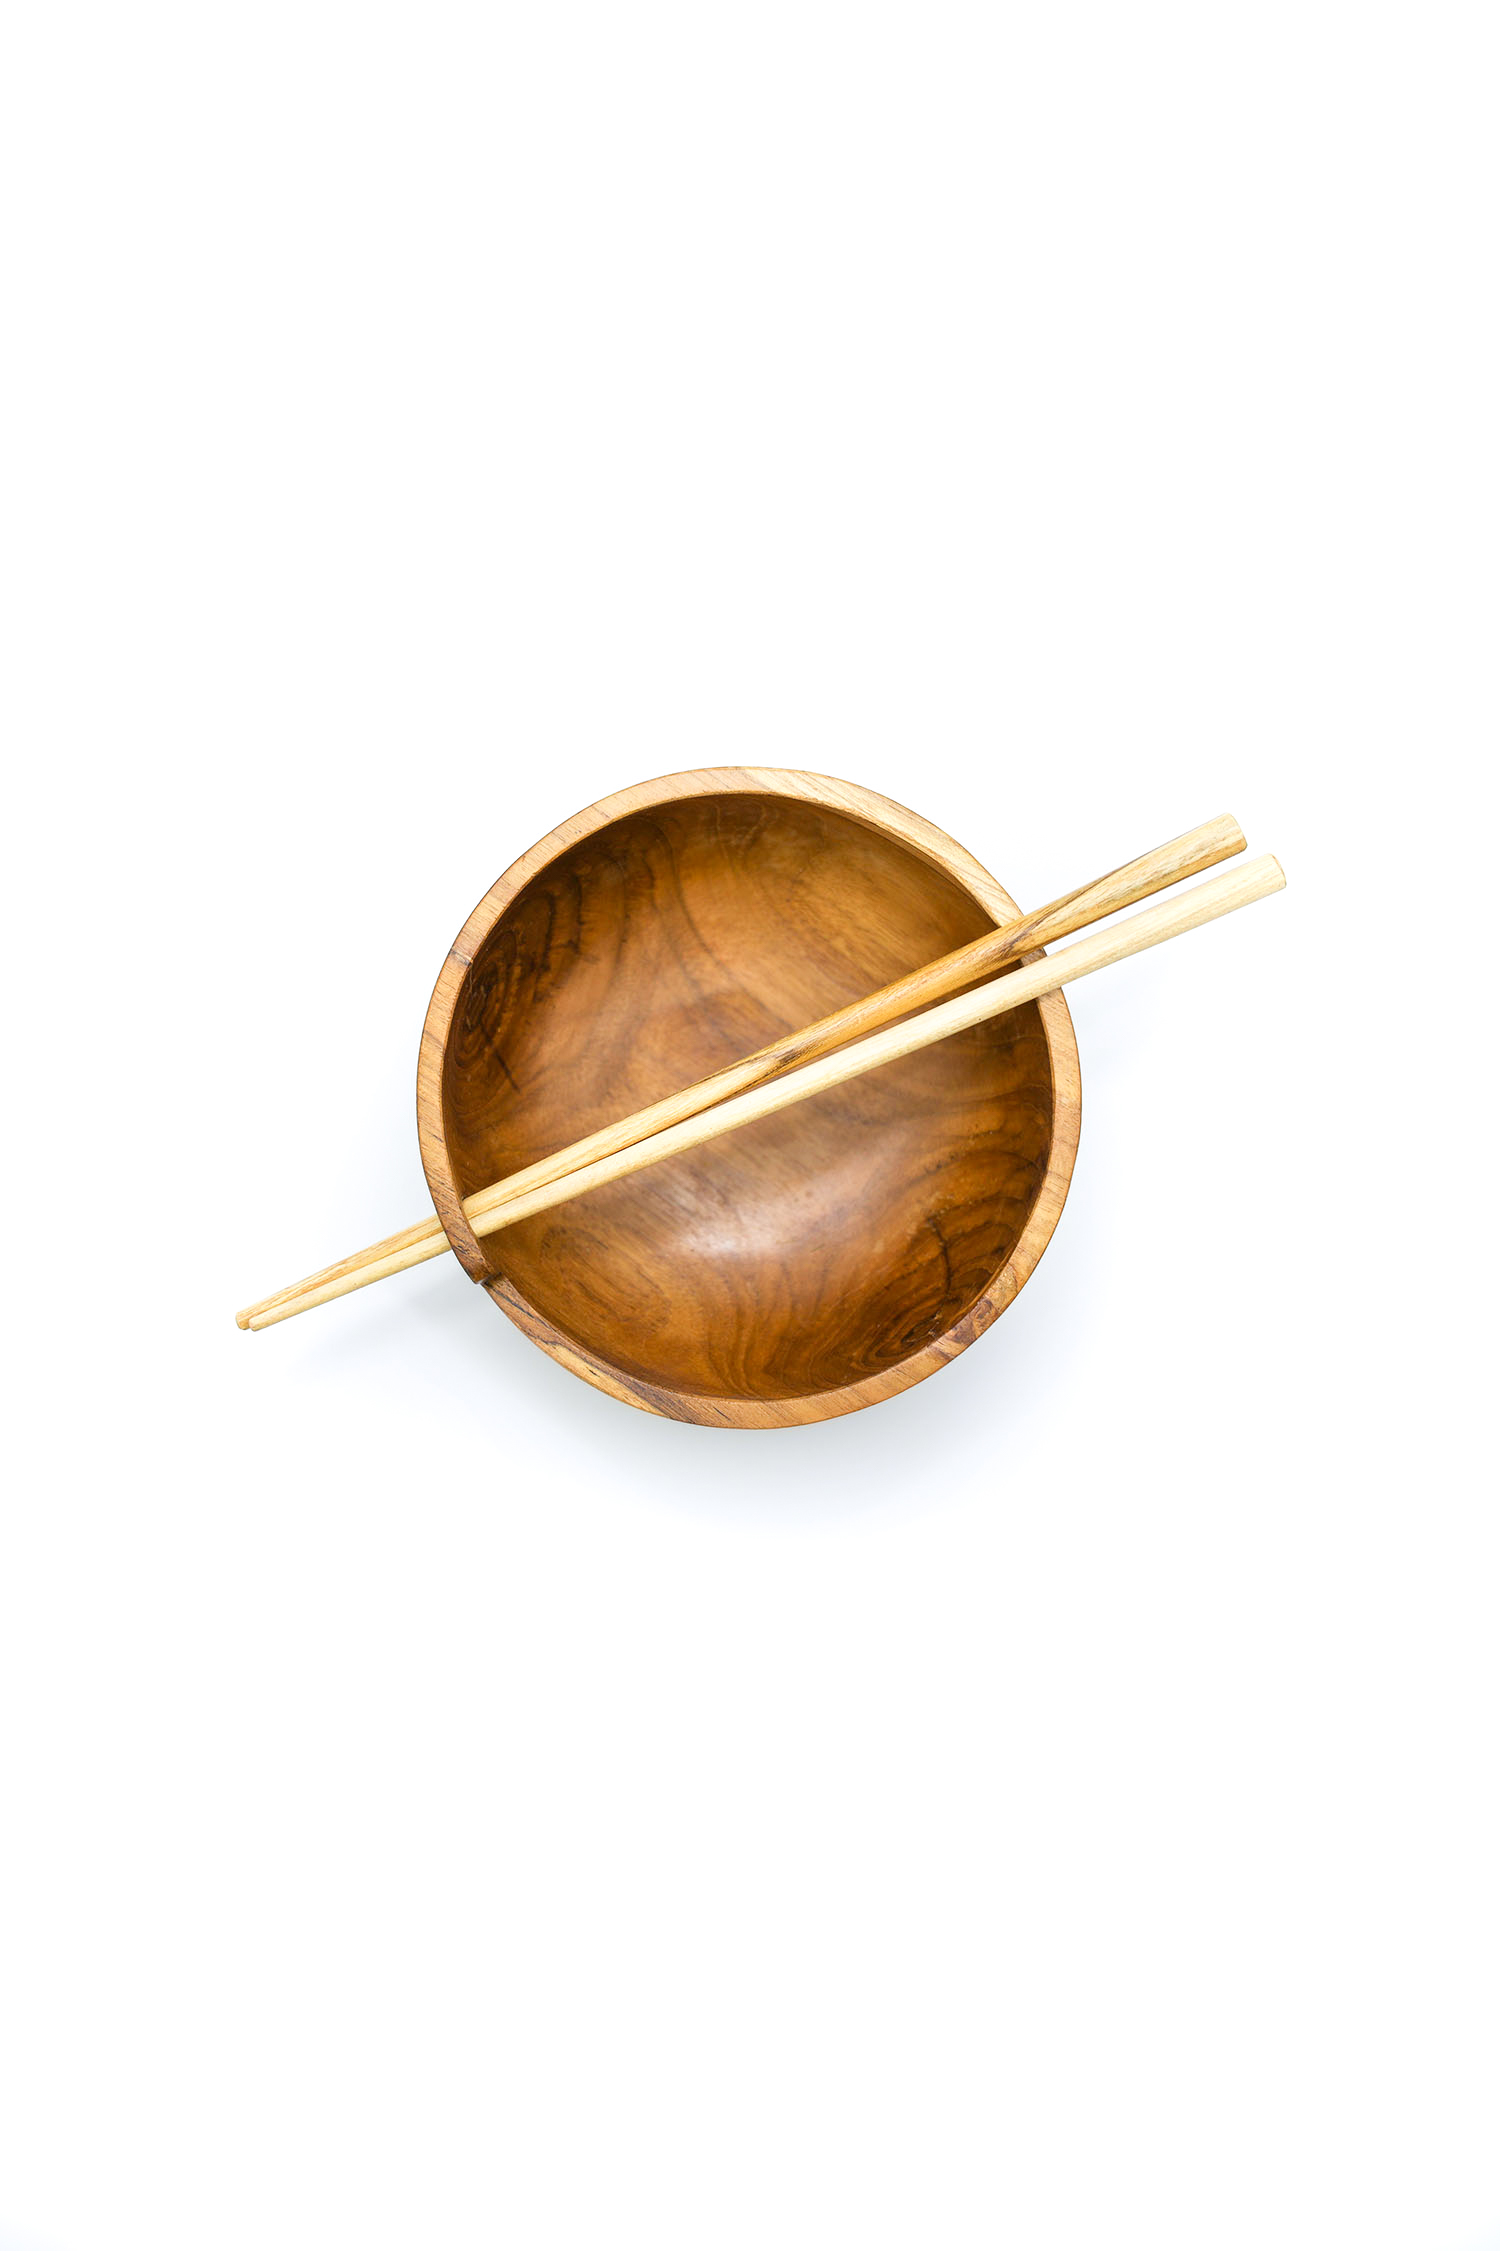 Wooden Japanese Rice Bowl - MEISOU